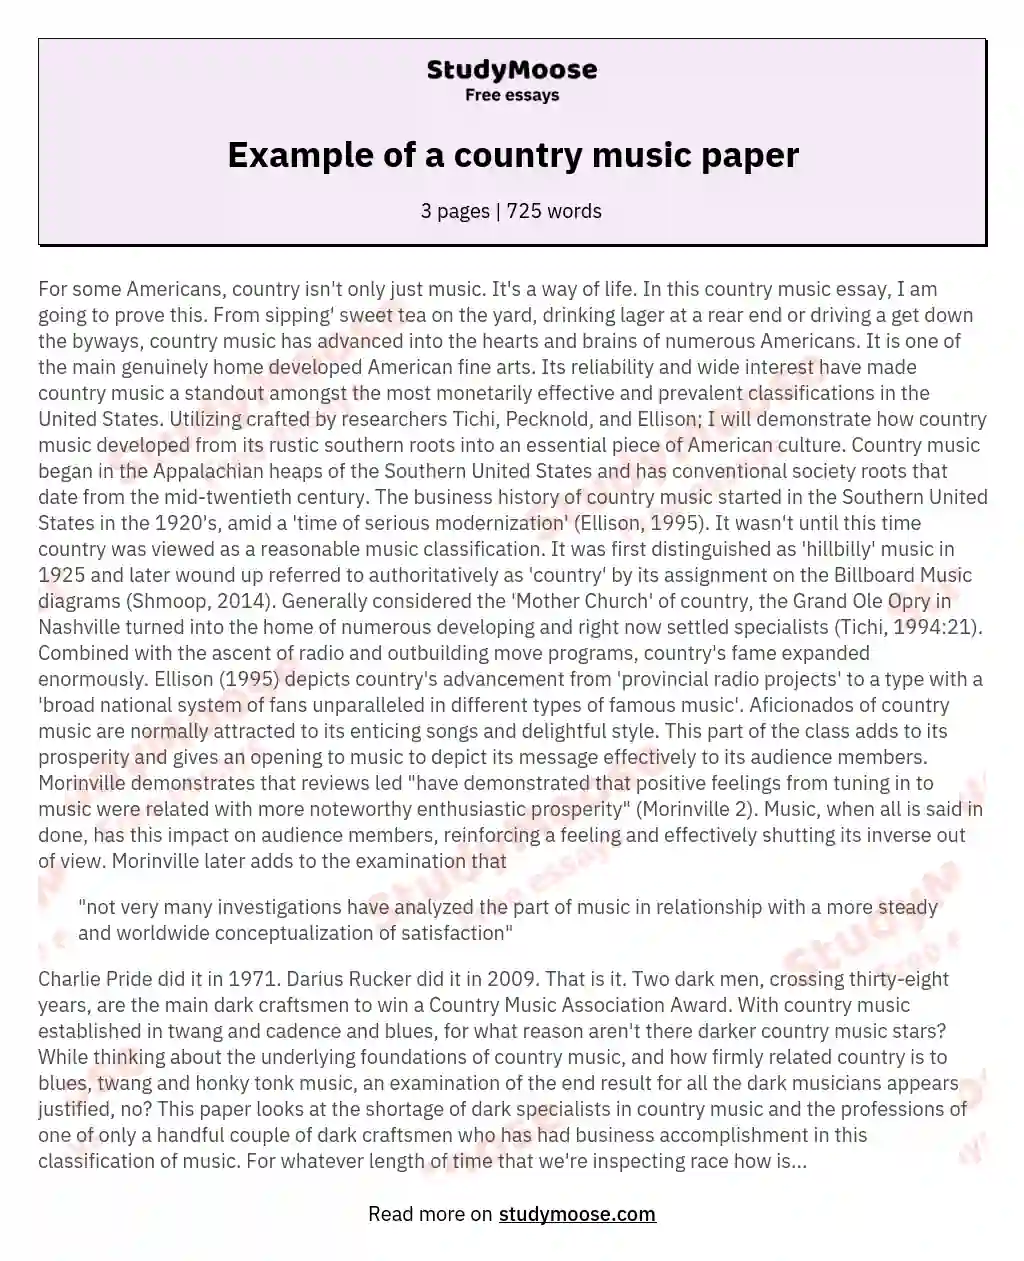 Example of a country music paper essay